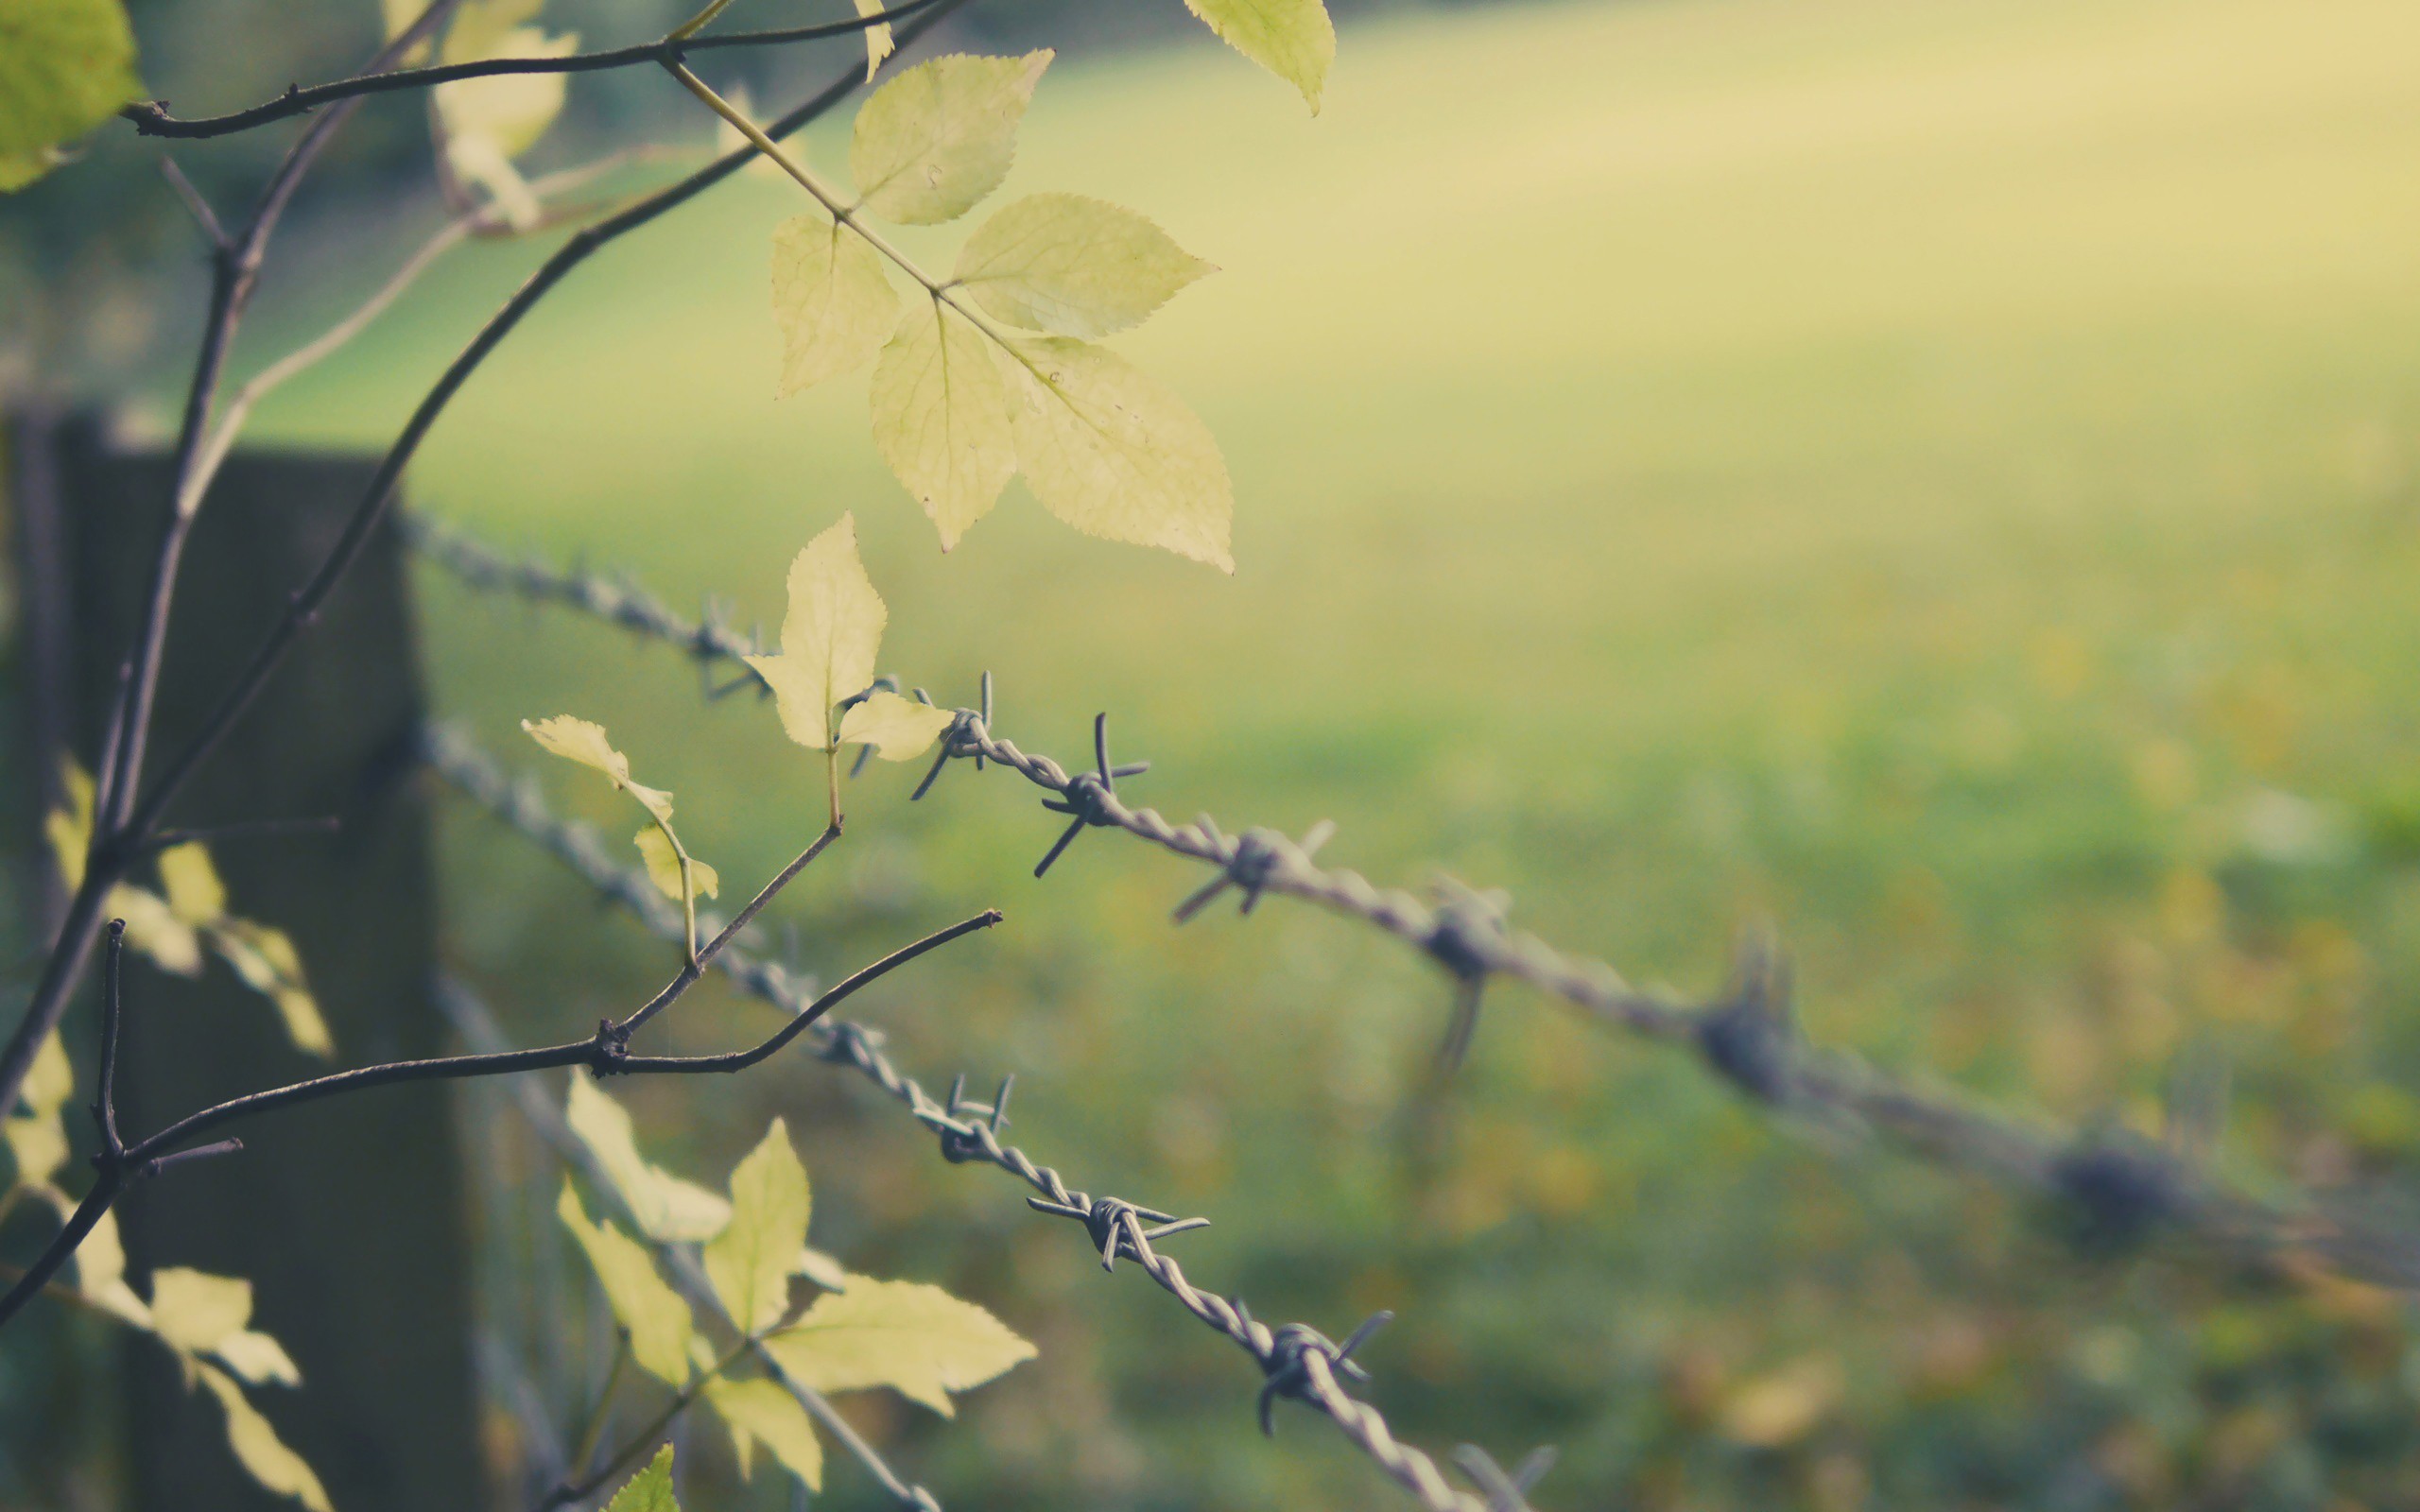 General 2560x1600 fence depth of field leaves barbed wire trees branch